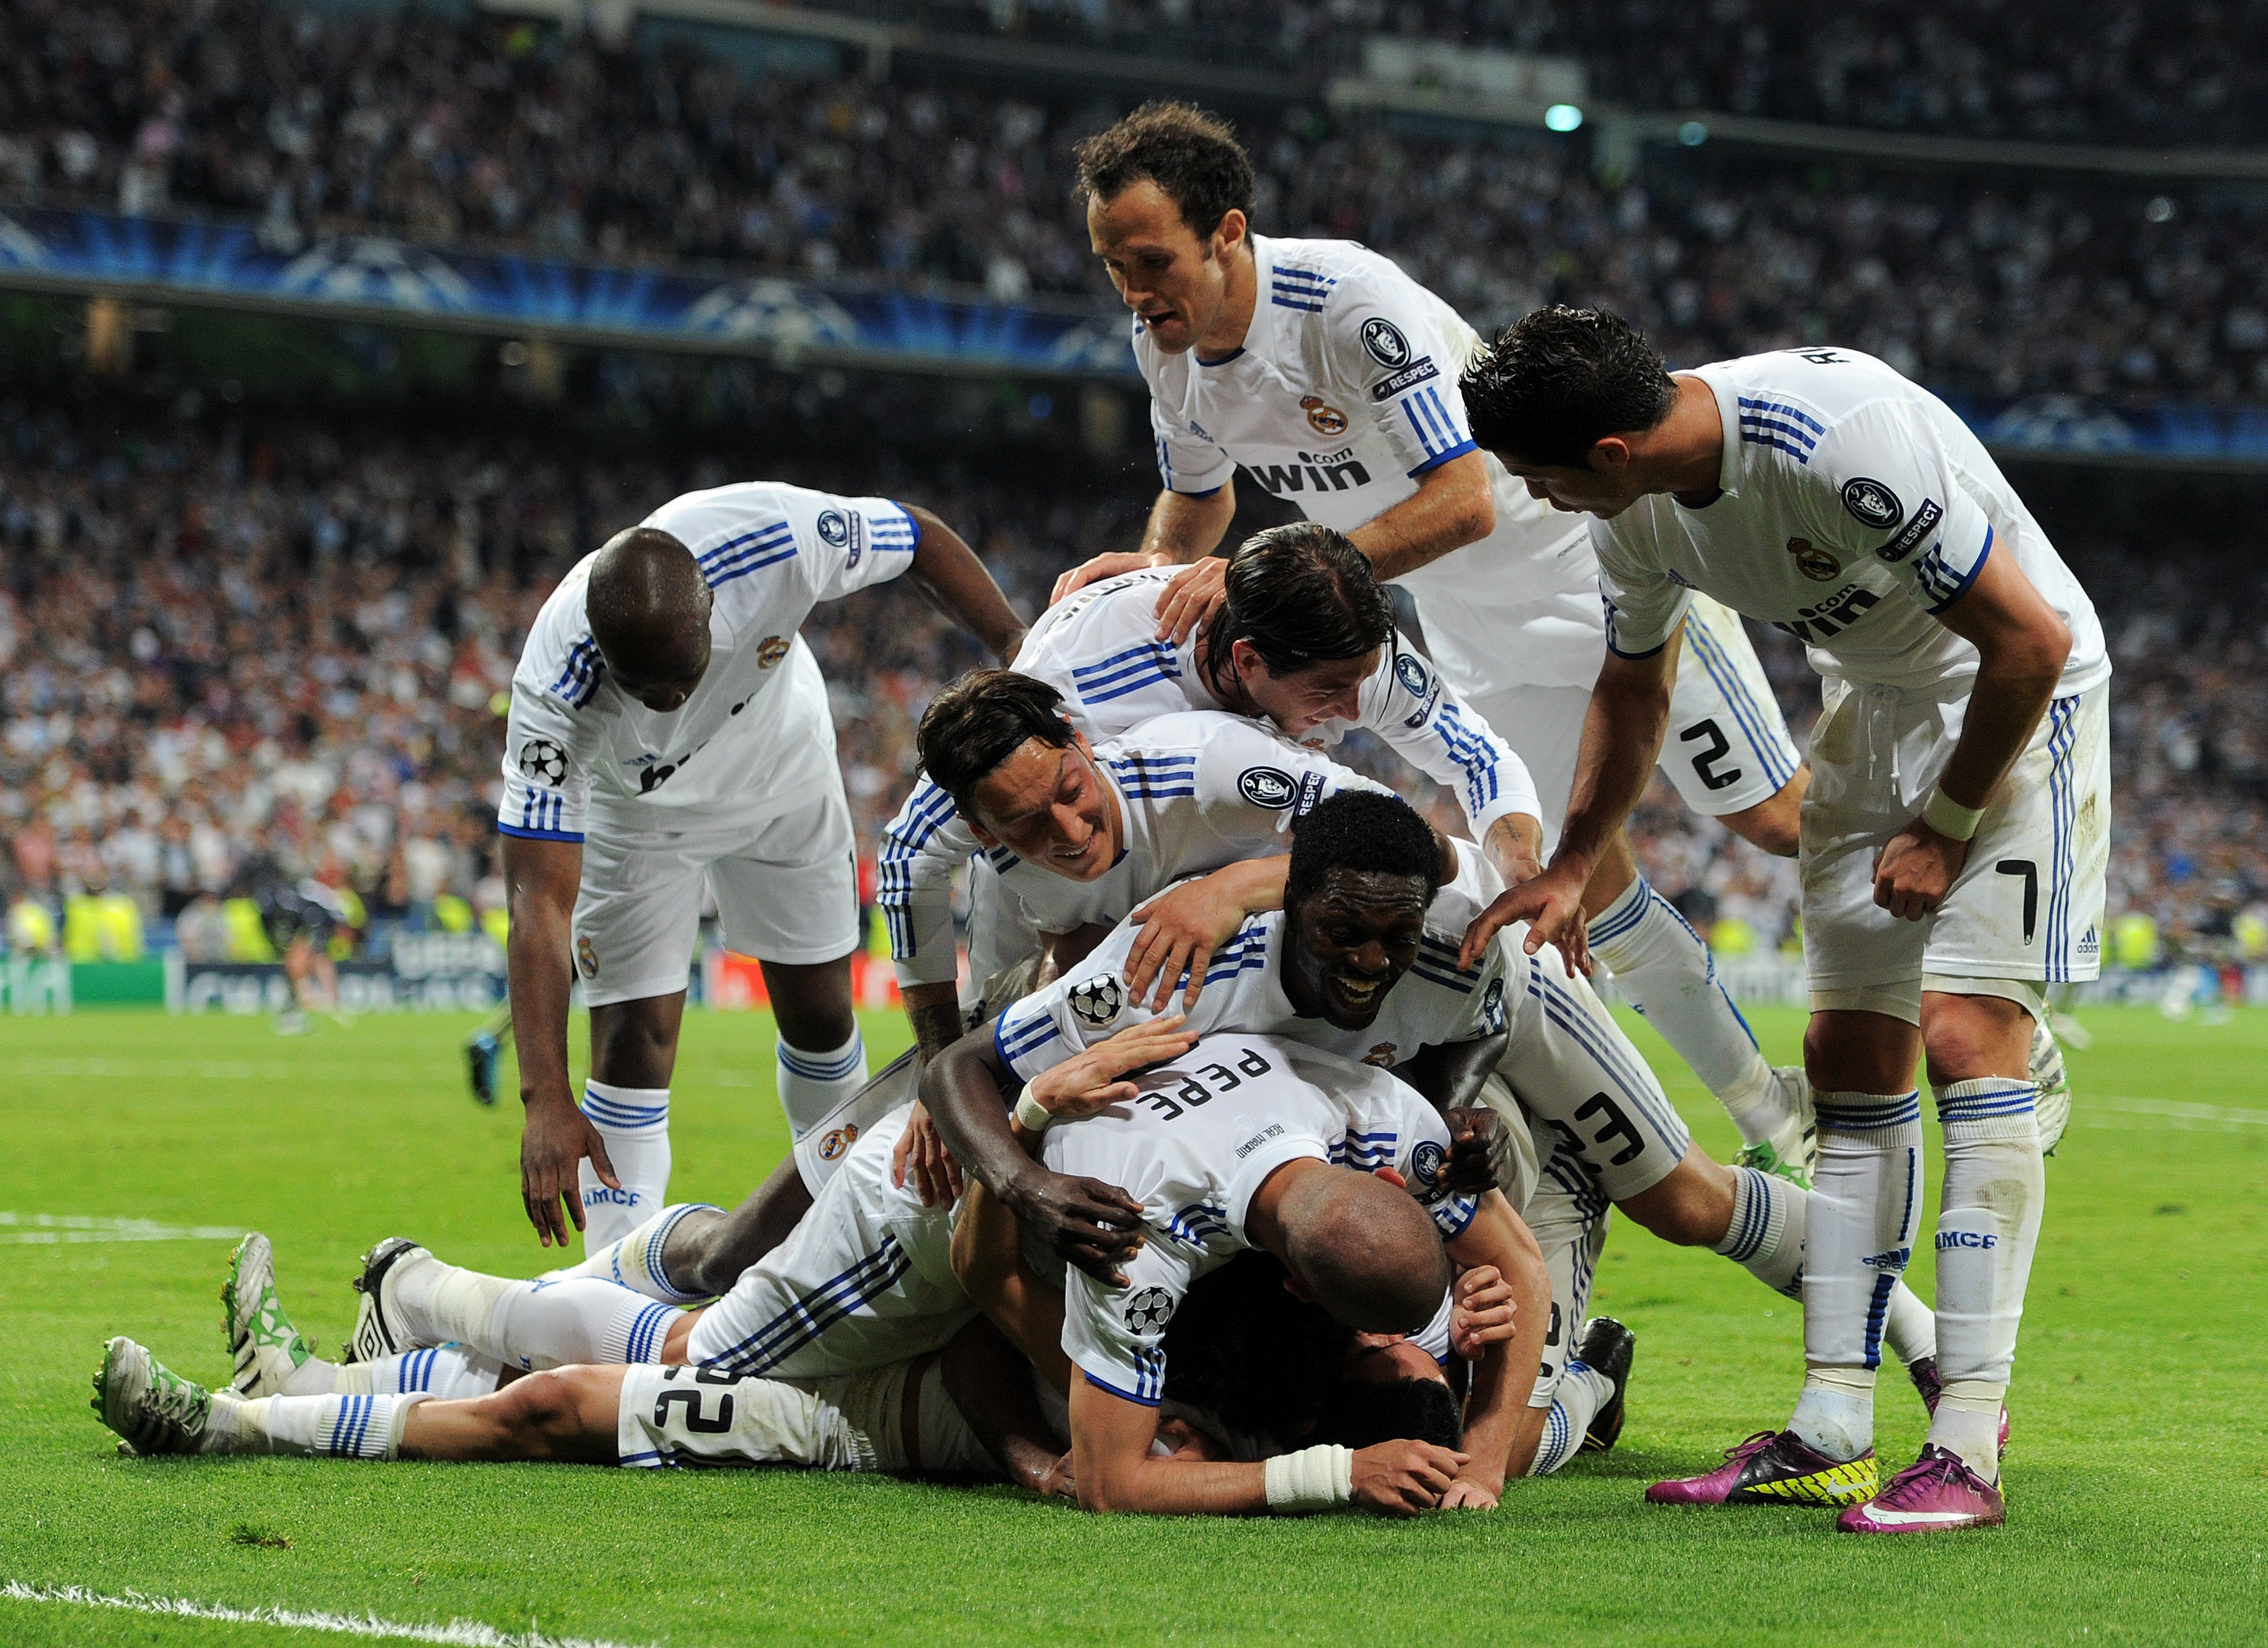 MADRID, SPAIN - APRIL 05:  Real Madrid players celebrate on top of their teammate Angel Di Maria after he scored during the UEFA Champions League quarter final first leg match between Real Madrid and Tottenham Hotspur at Estadio Santiago Bernabeu on April